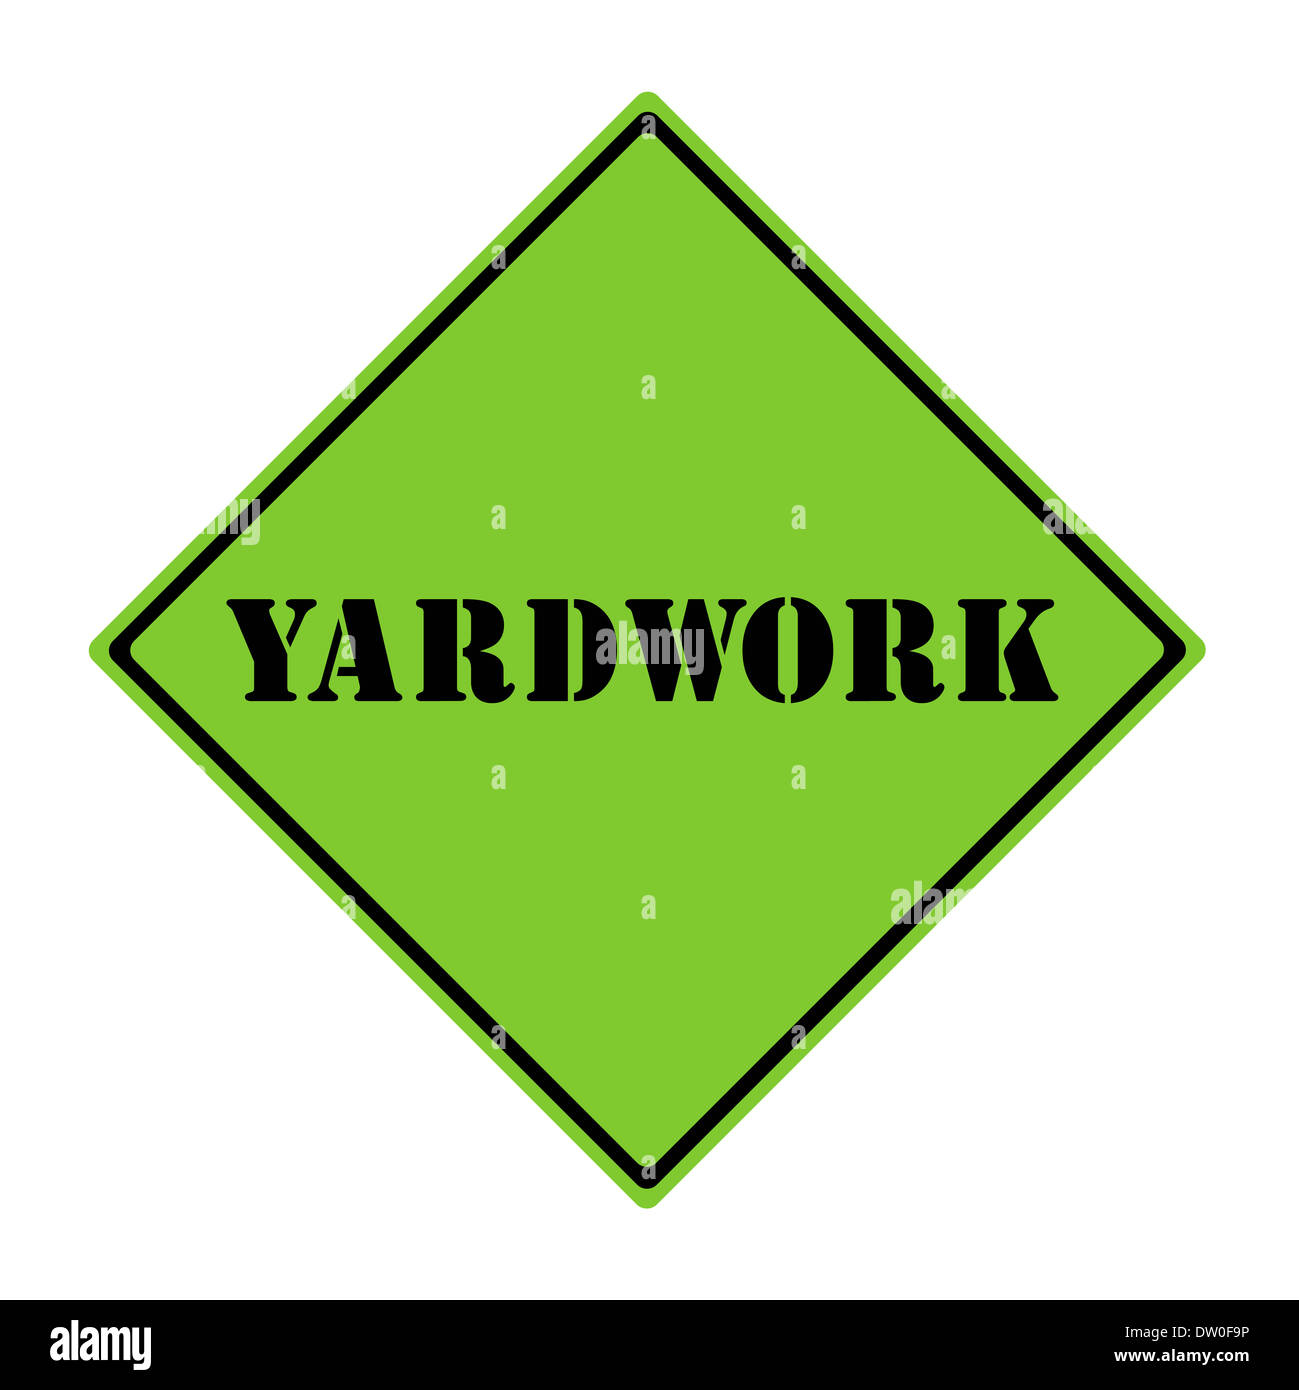 A green and black diamond shaped road sign with the word YARDWORK making a great concept. Stock Photo